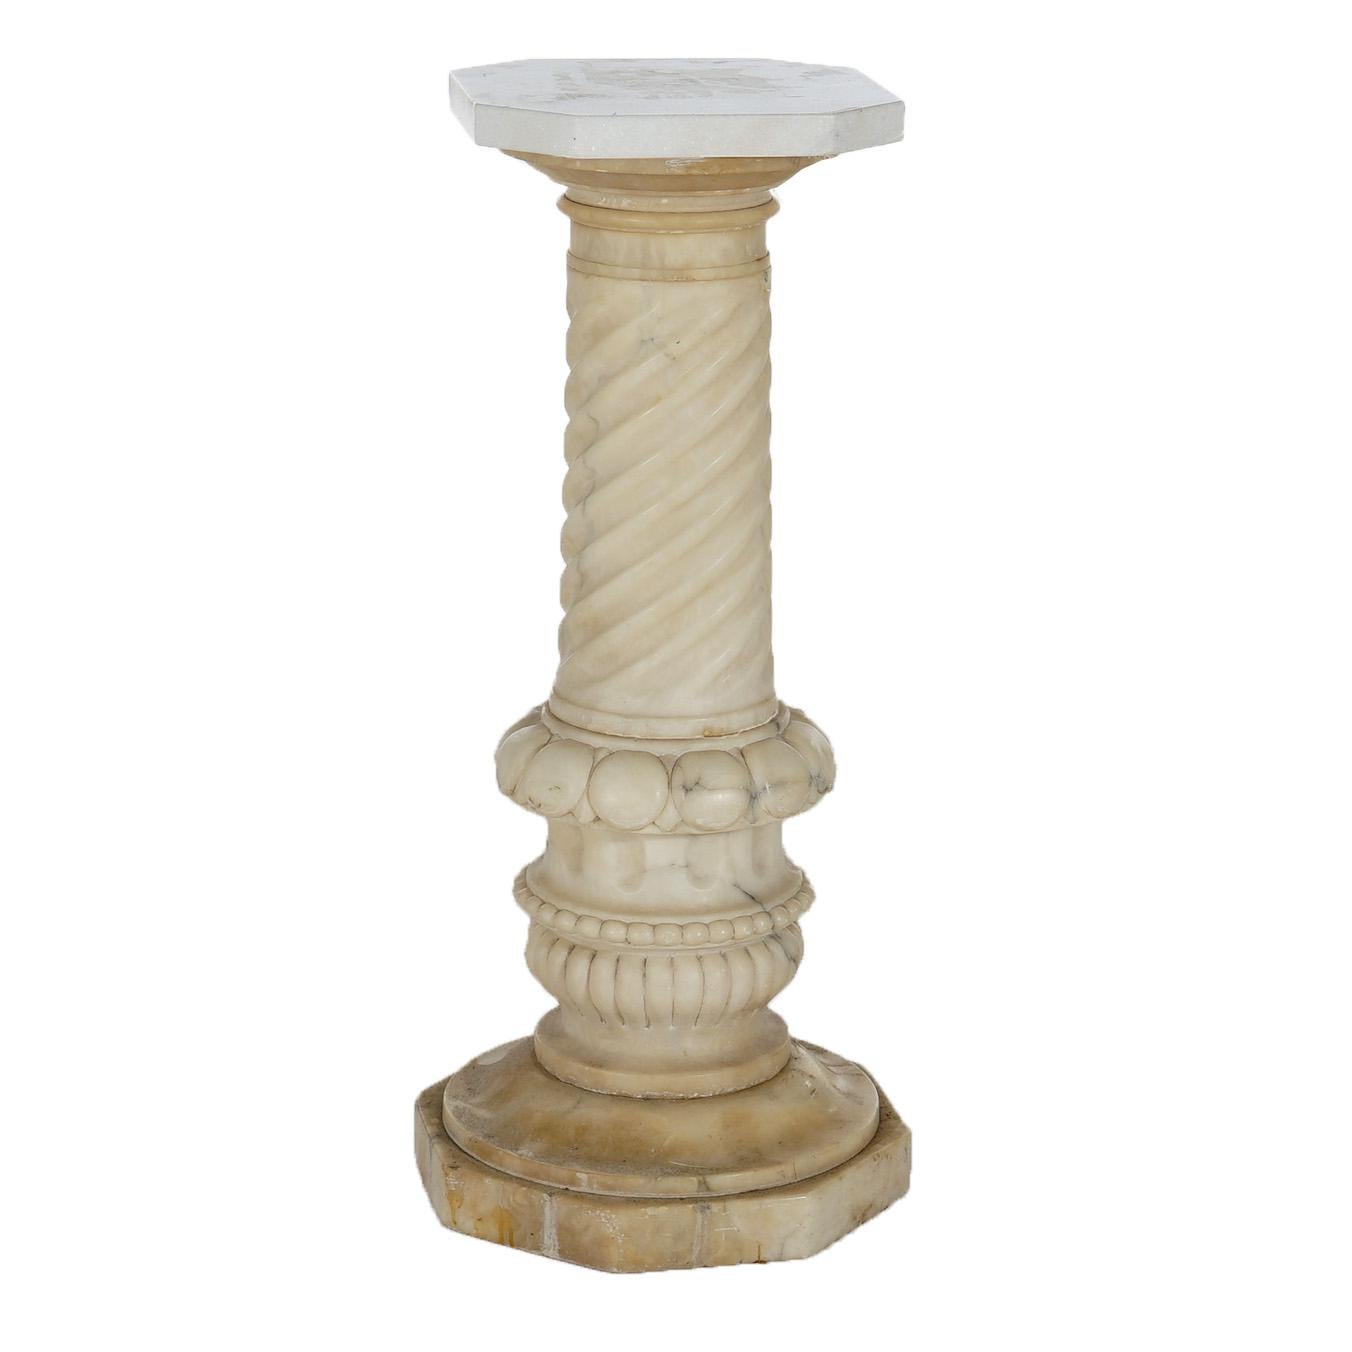 ***Ask About Reduced In-House Shipping Rates - Reliable Service & Fully Insured***

Antique Neoclassical Greco Carved Marble Sculpture Display Stand with Rope Twist Column and Gadroon Elements, 19thC

Measures - 32.5